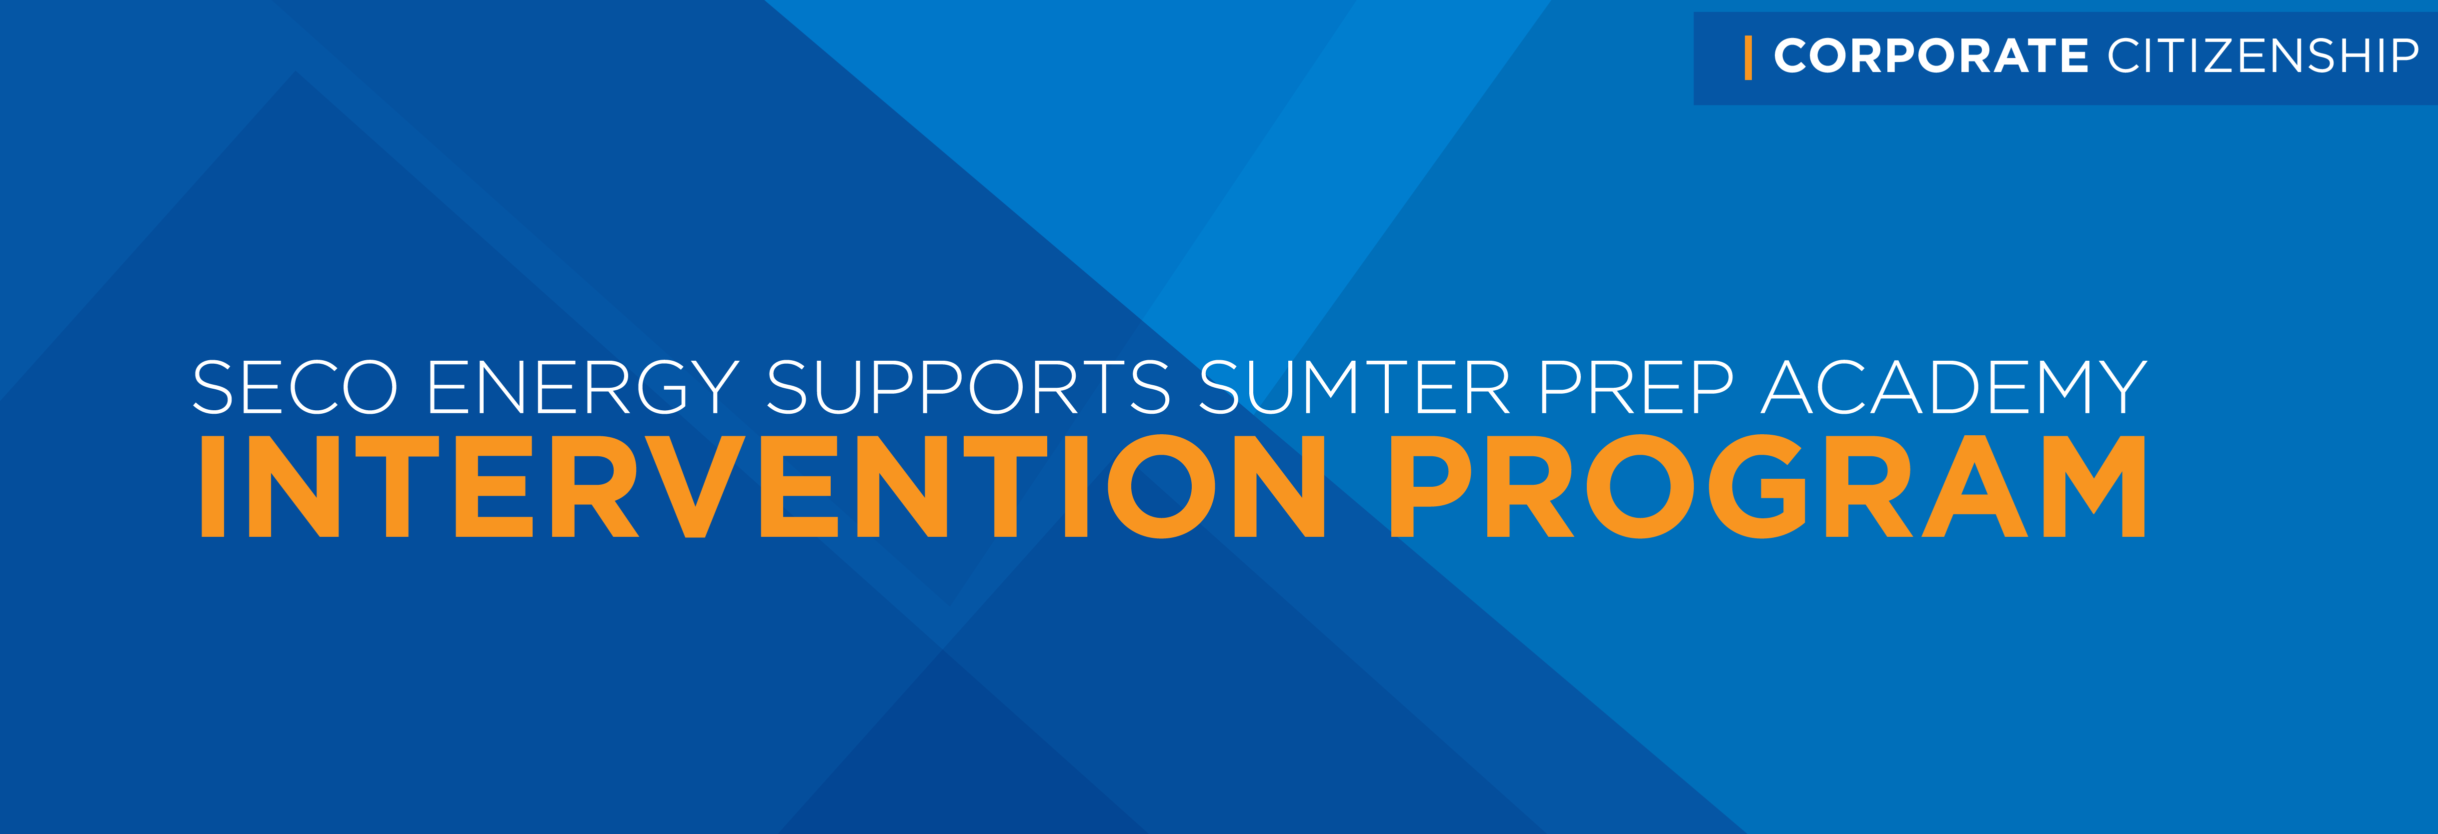 SECO Energy Supports Sumter PREP Academy Intervention Program